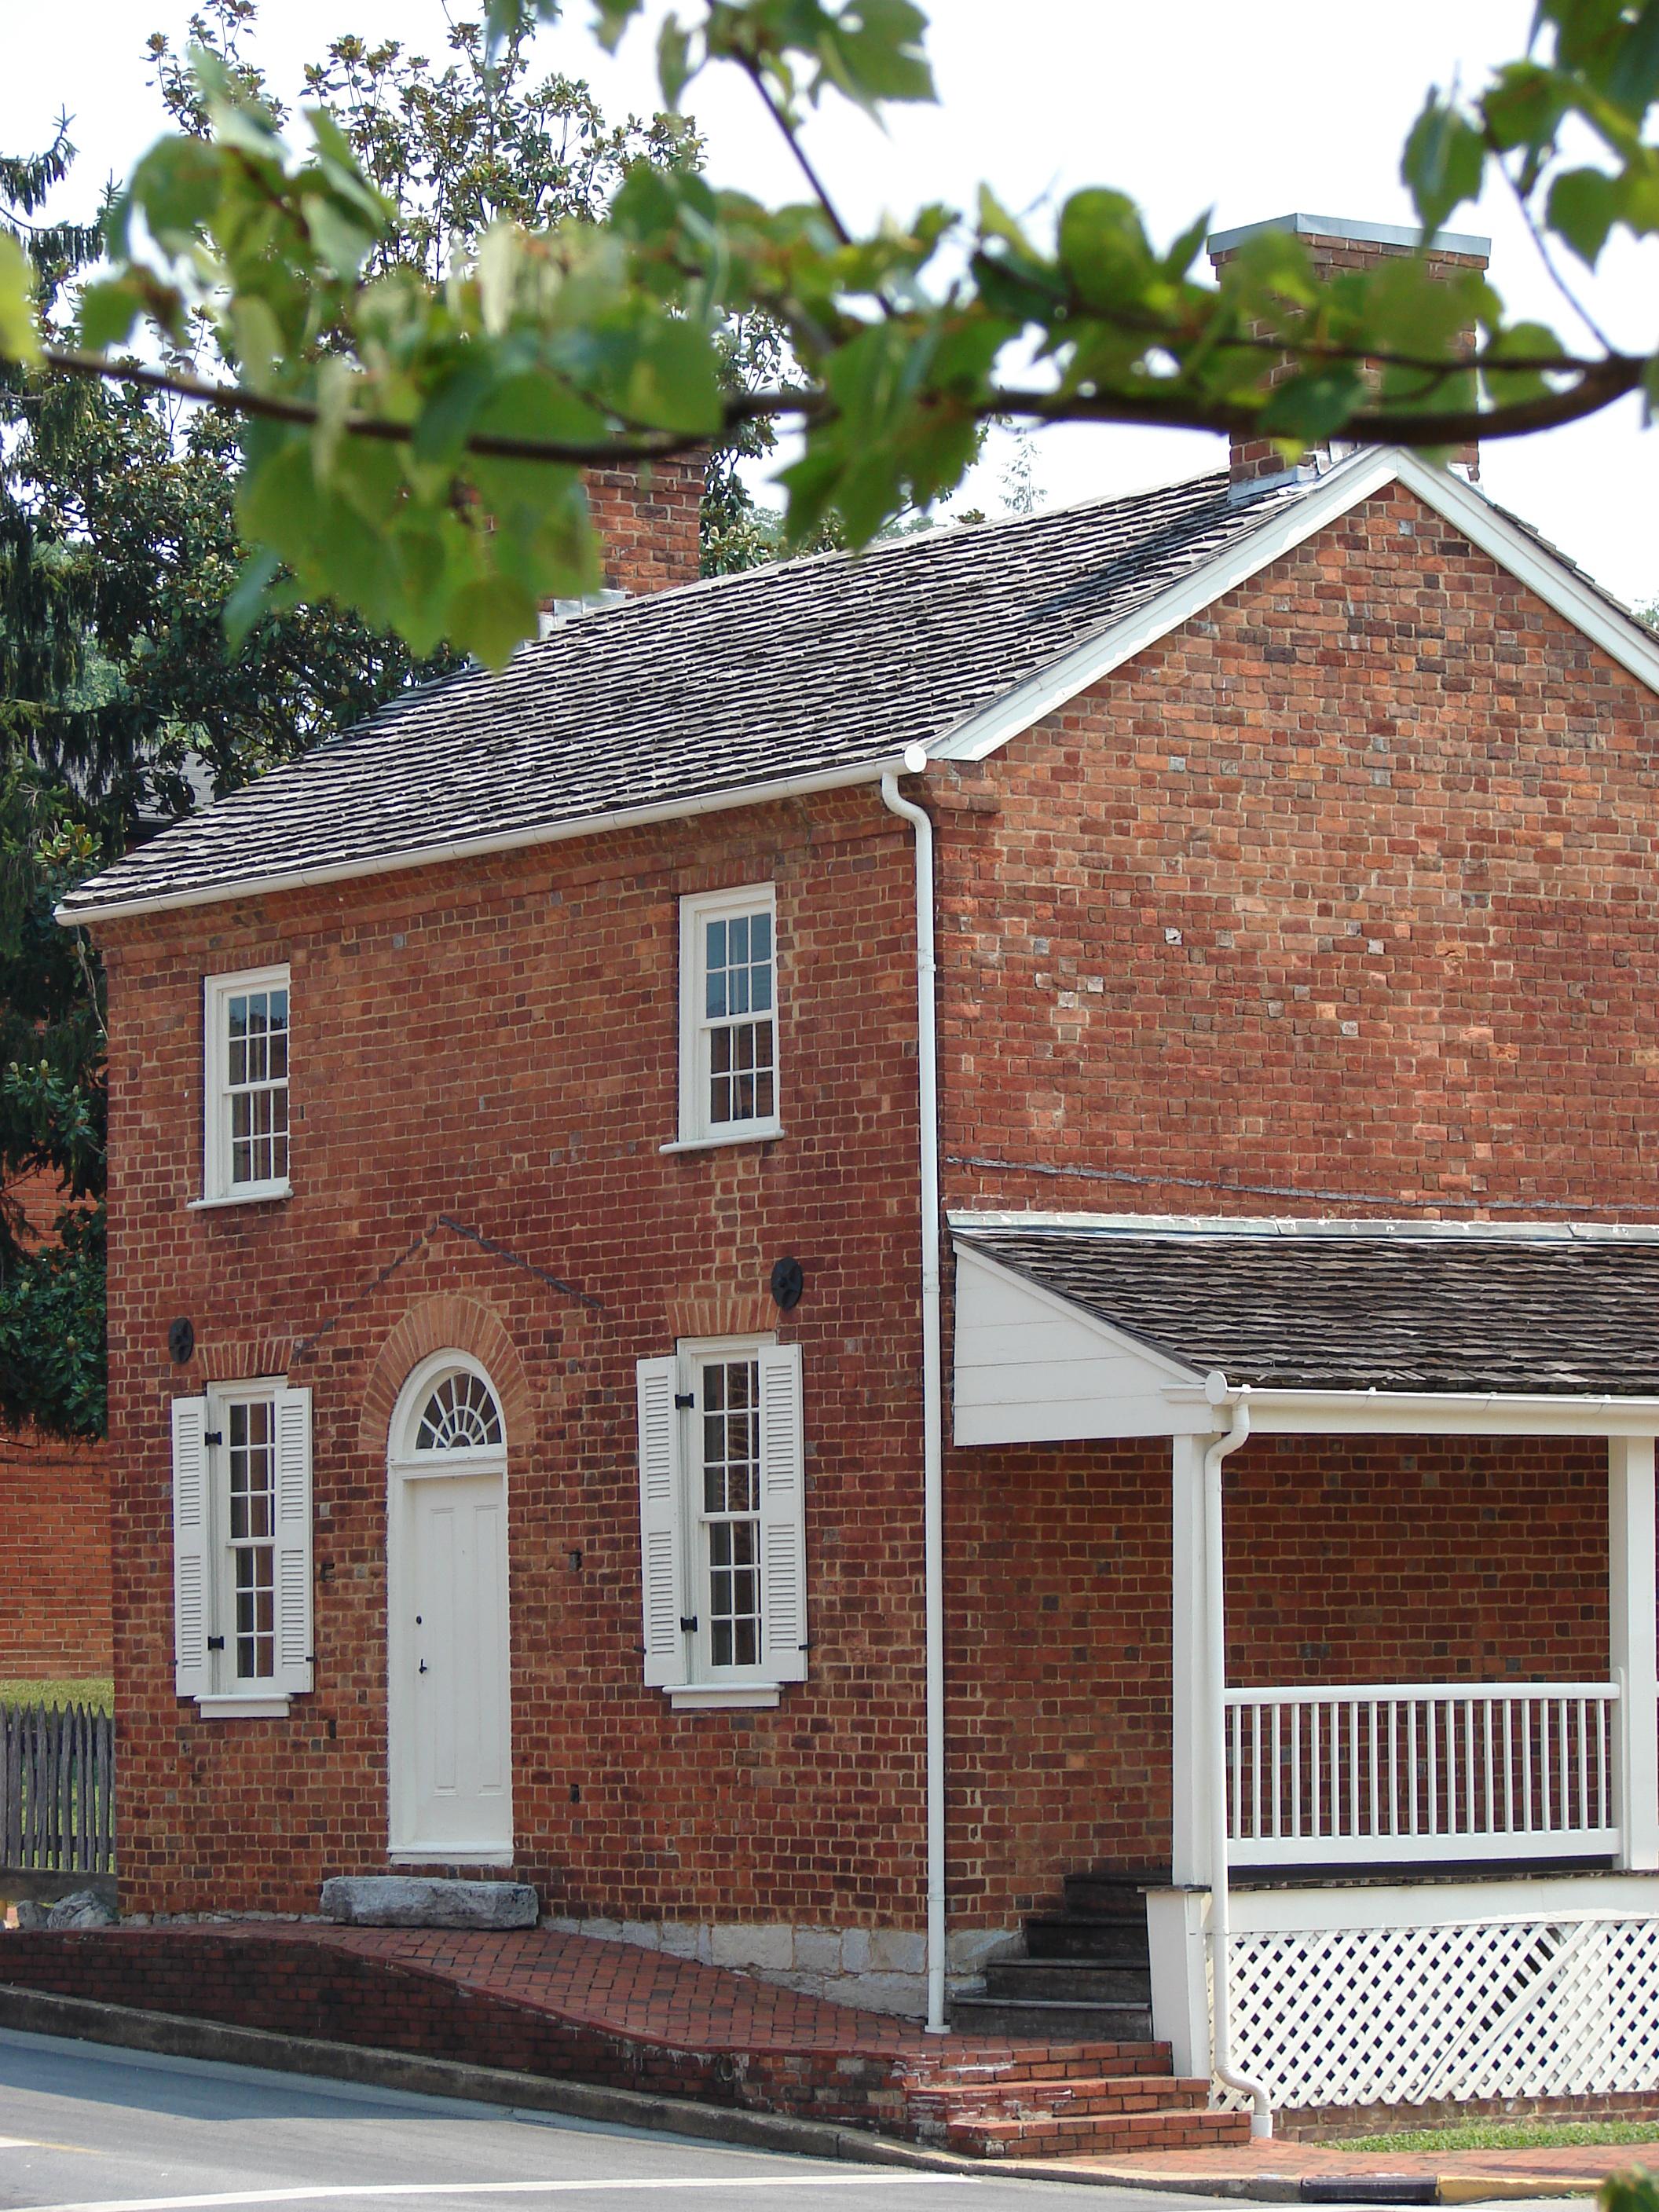 Andrew Johnson's Early Home